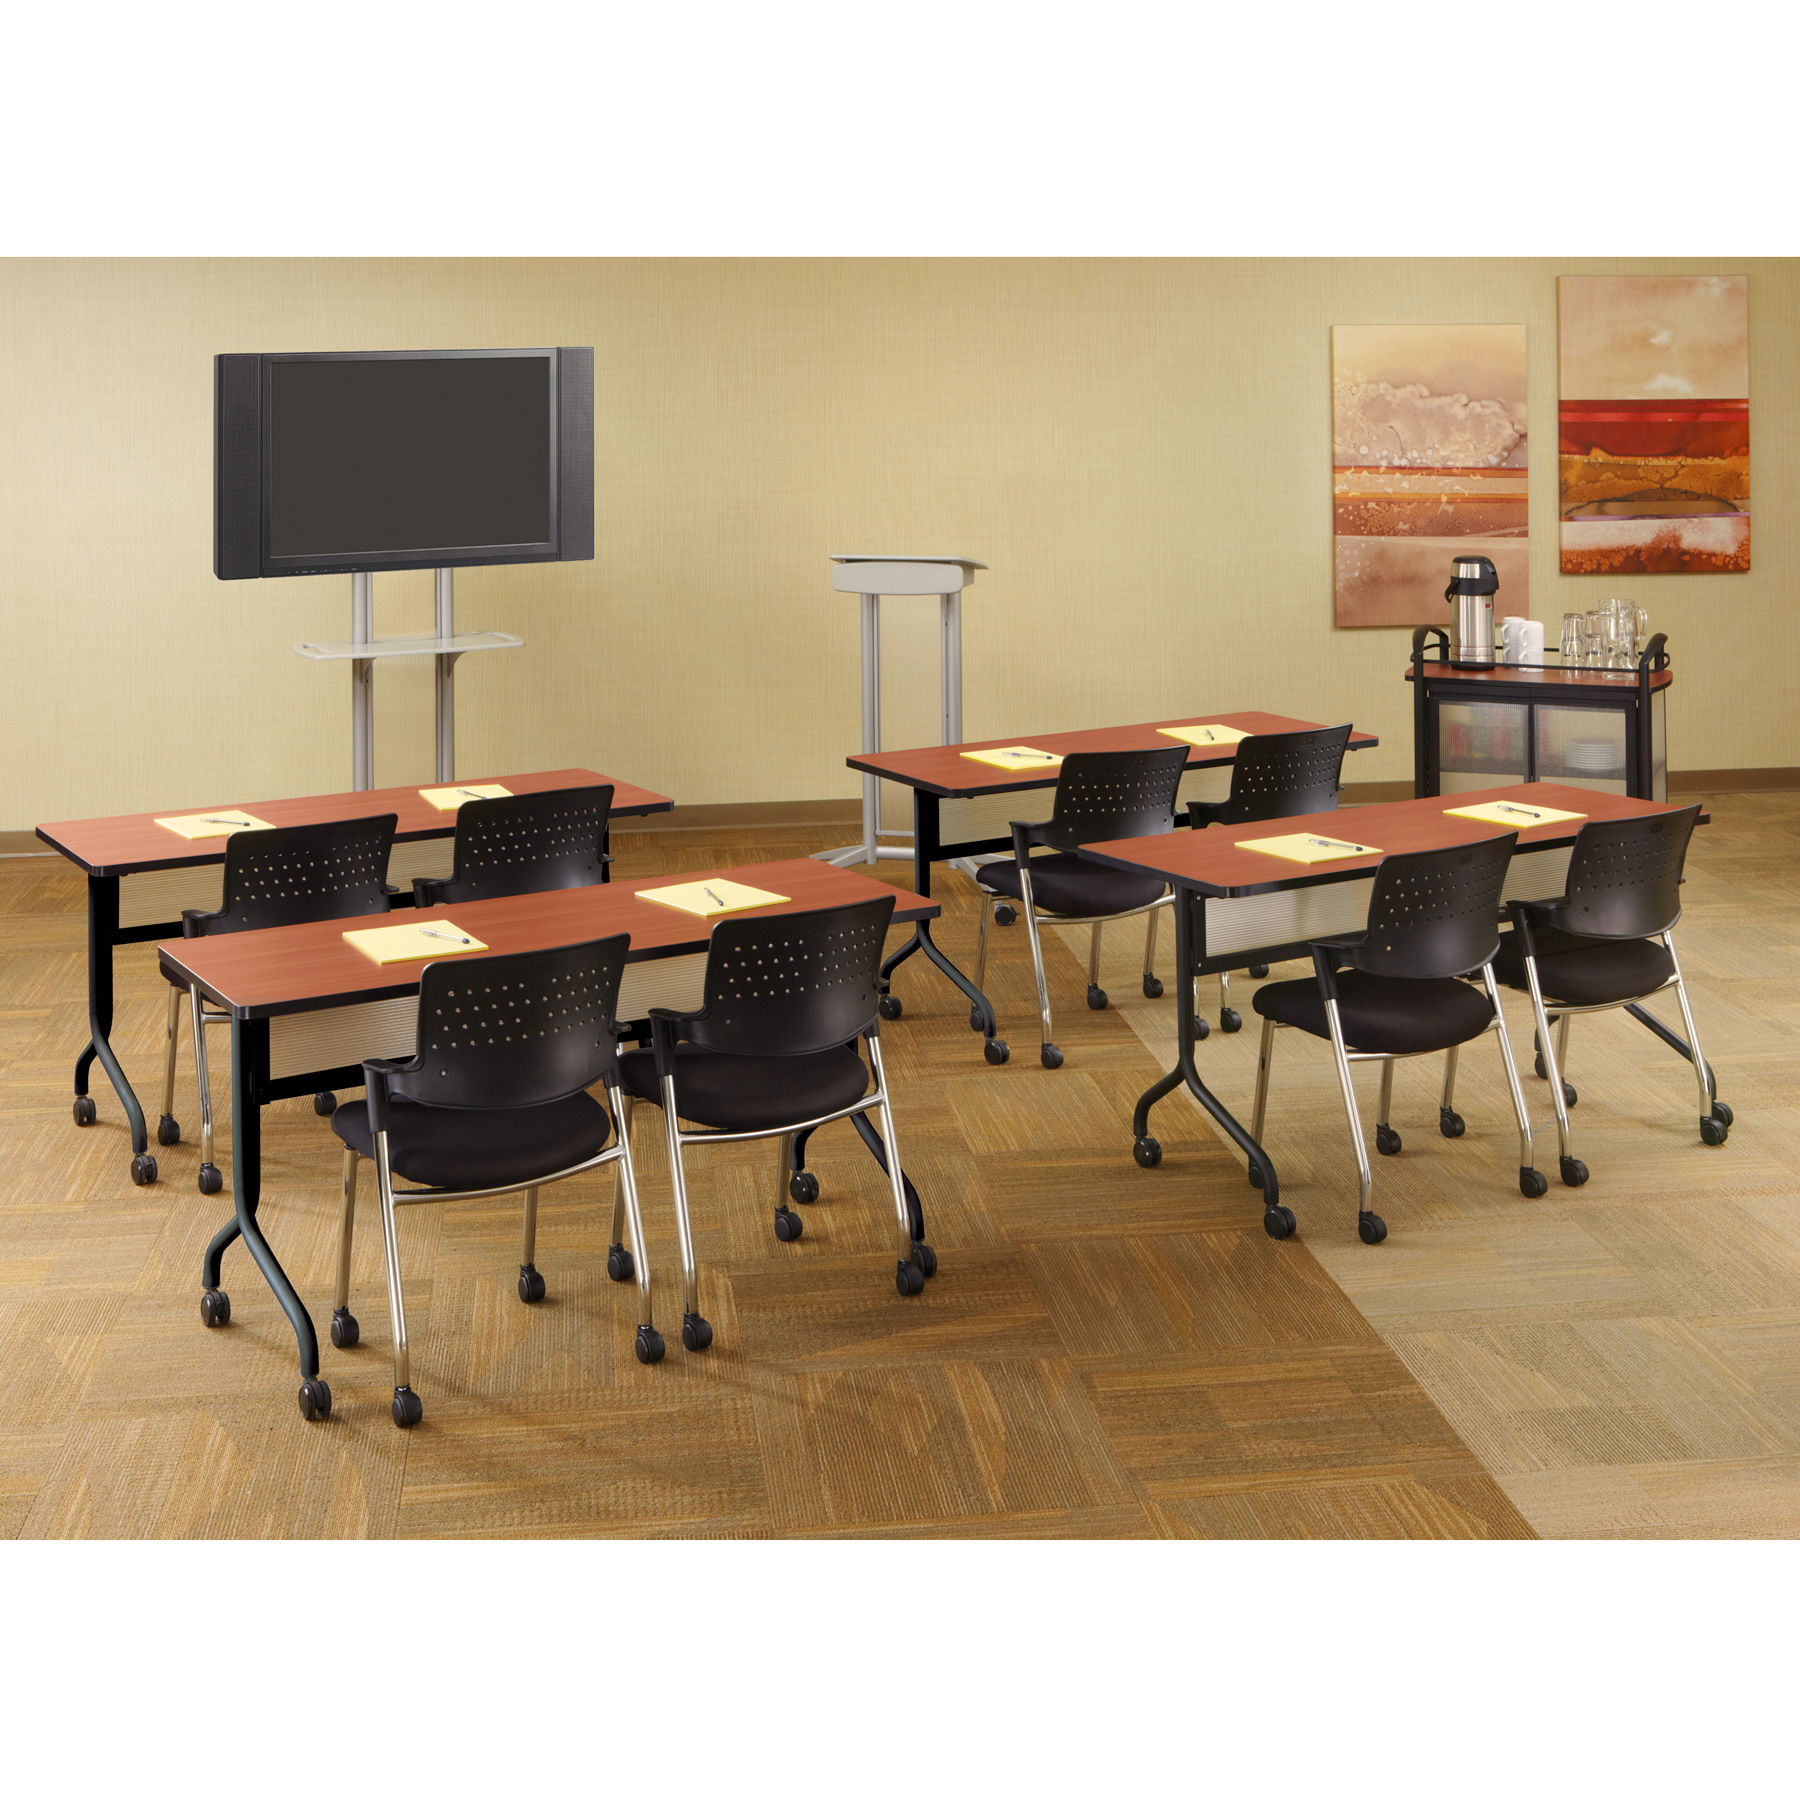 Tables sold separately Black Safco Products 2059BL Power Module for Rumba and Impromptu Tables 